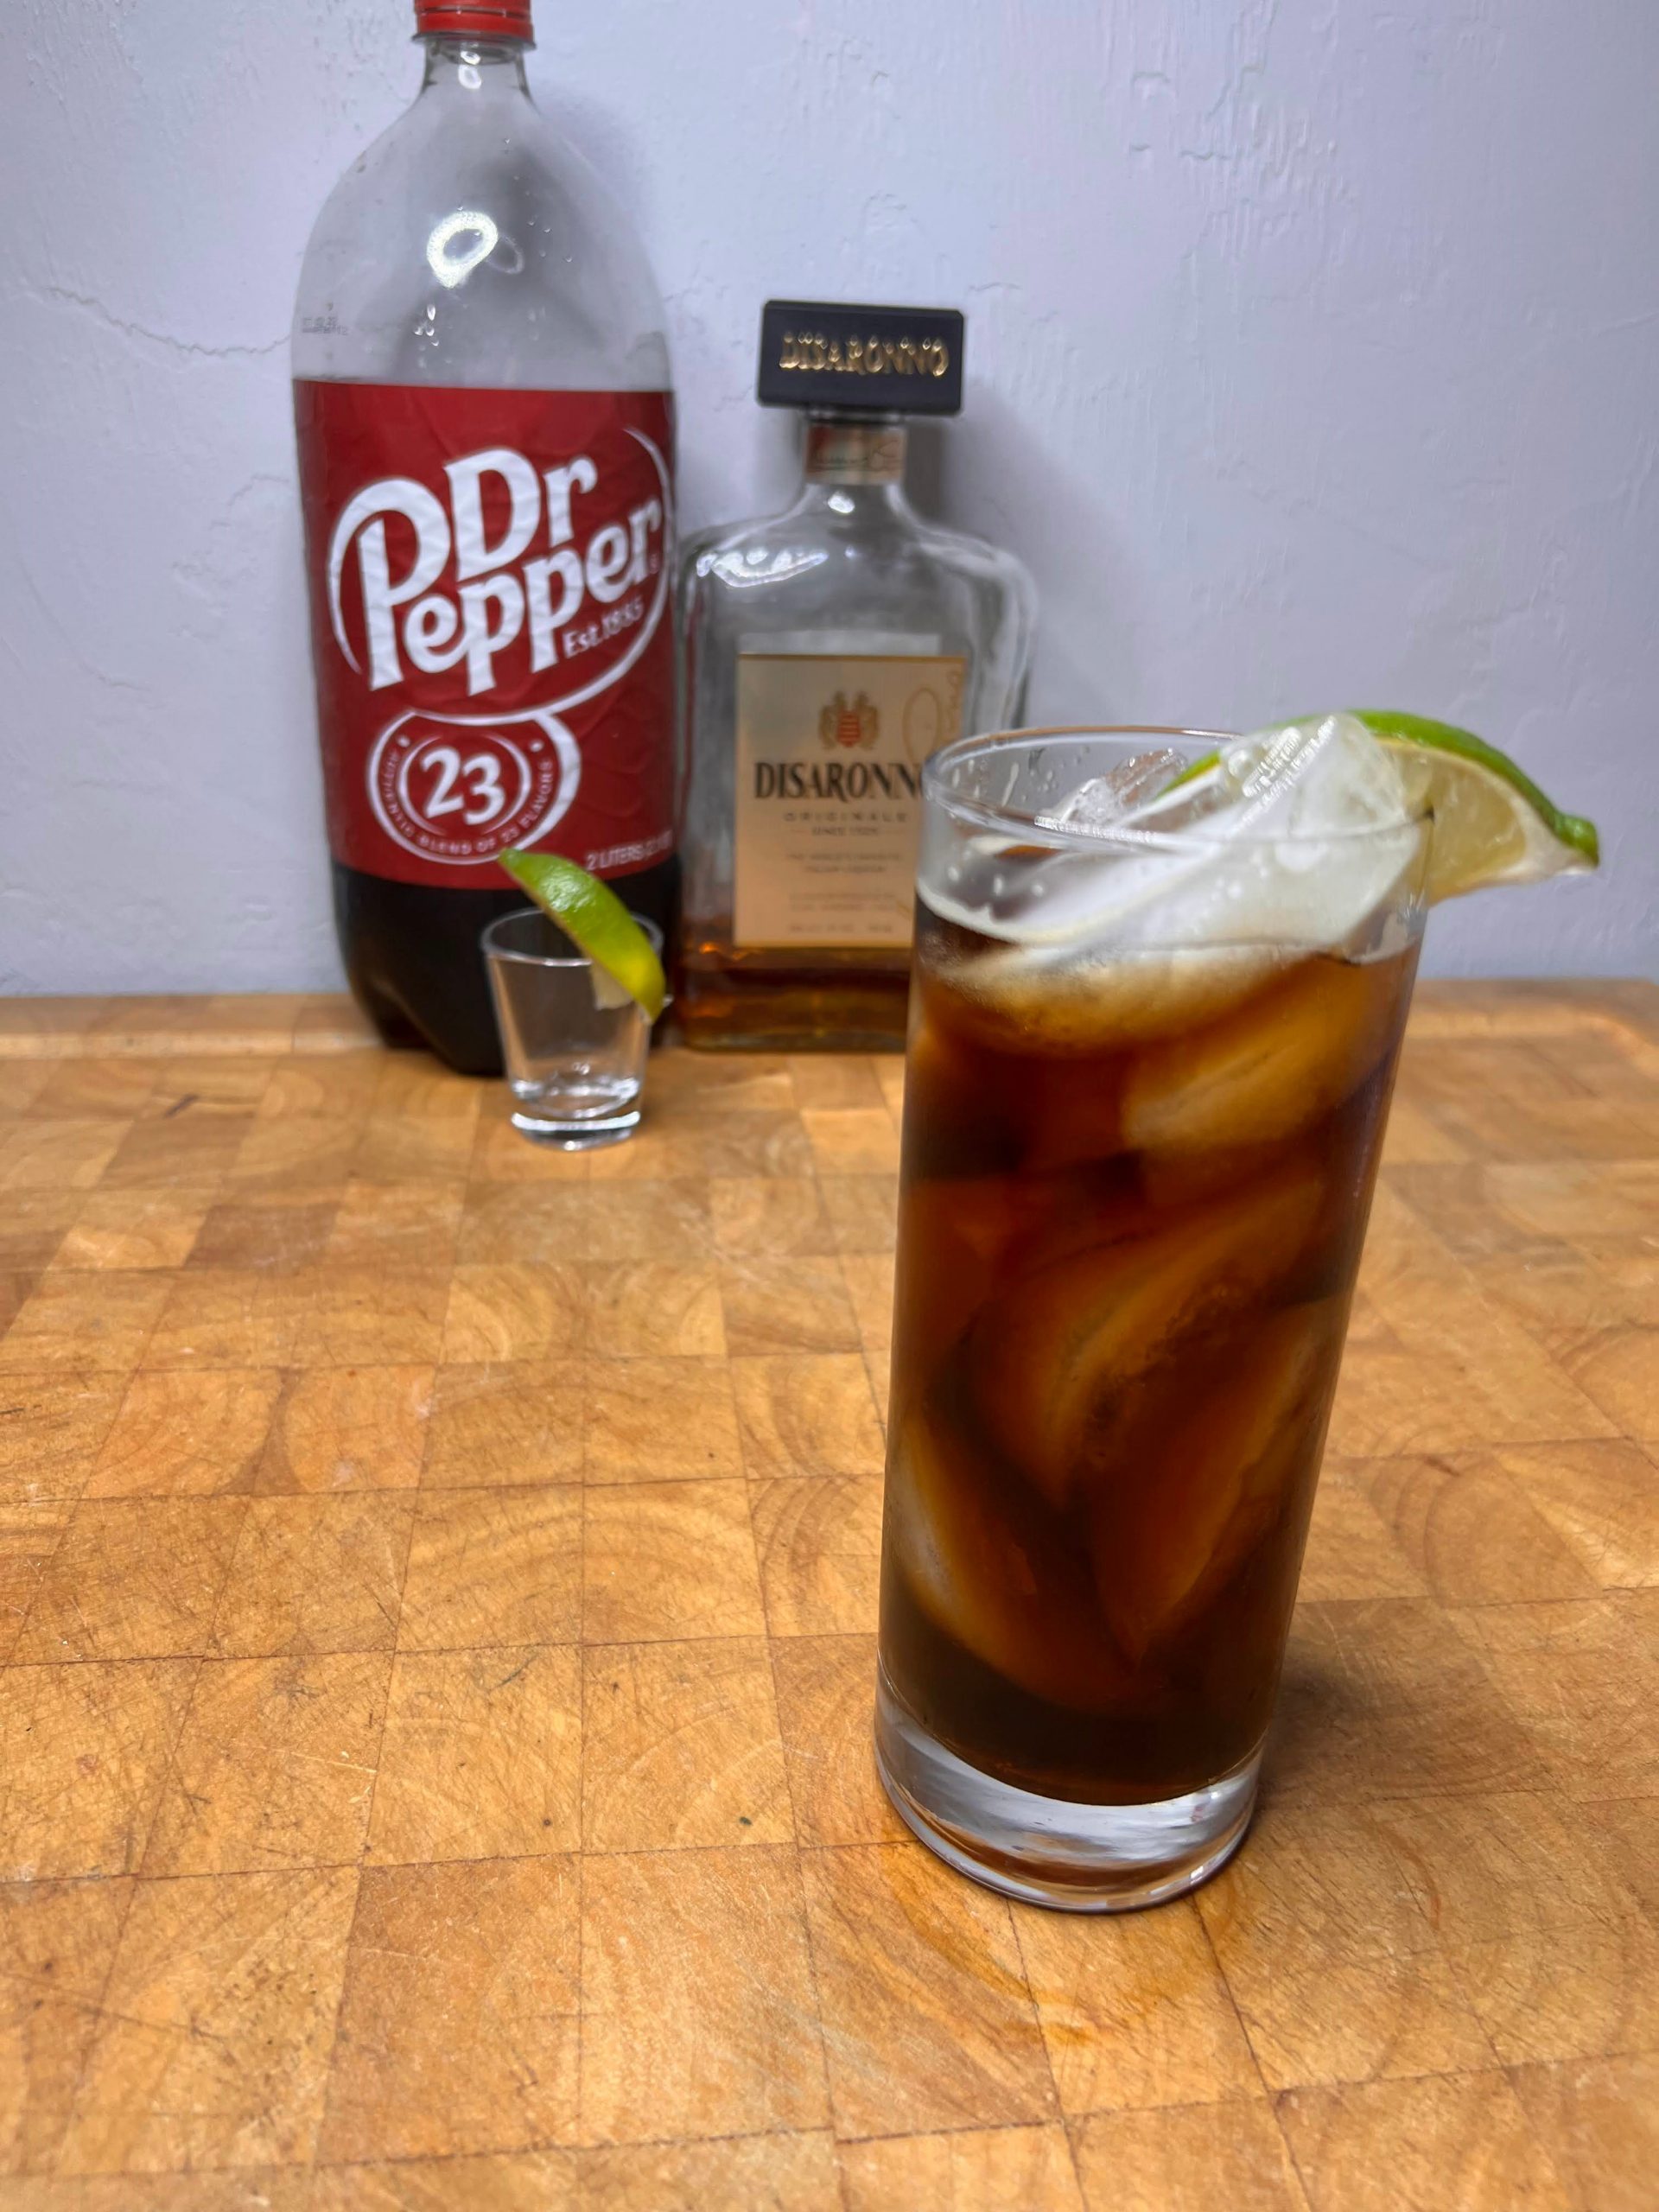 amaretto and dr pepper in glass with bottles in background